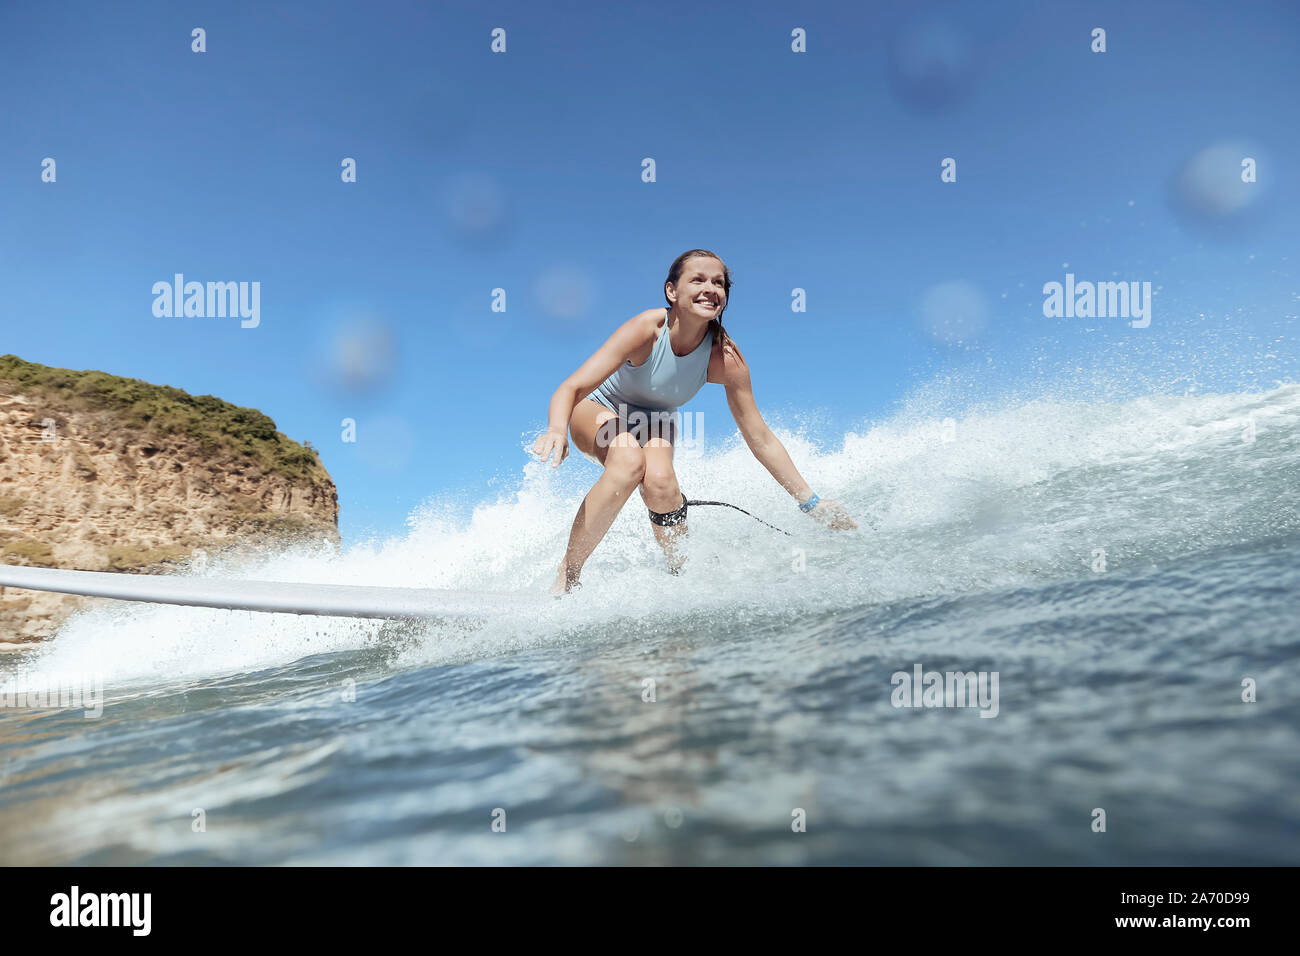 Smiling woman surfing Stock Photo